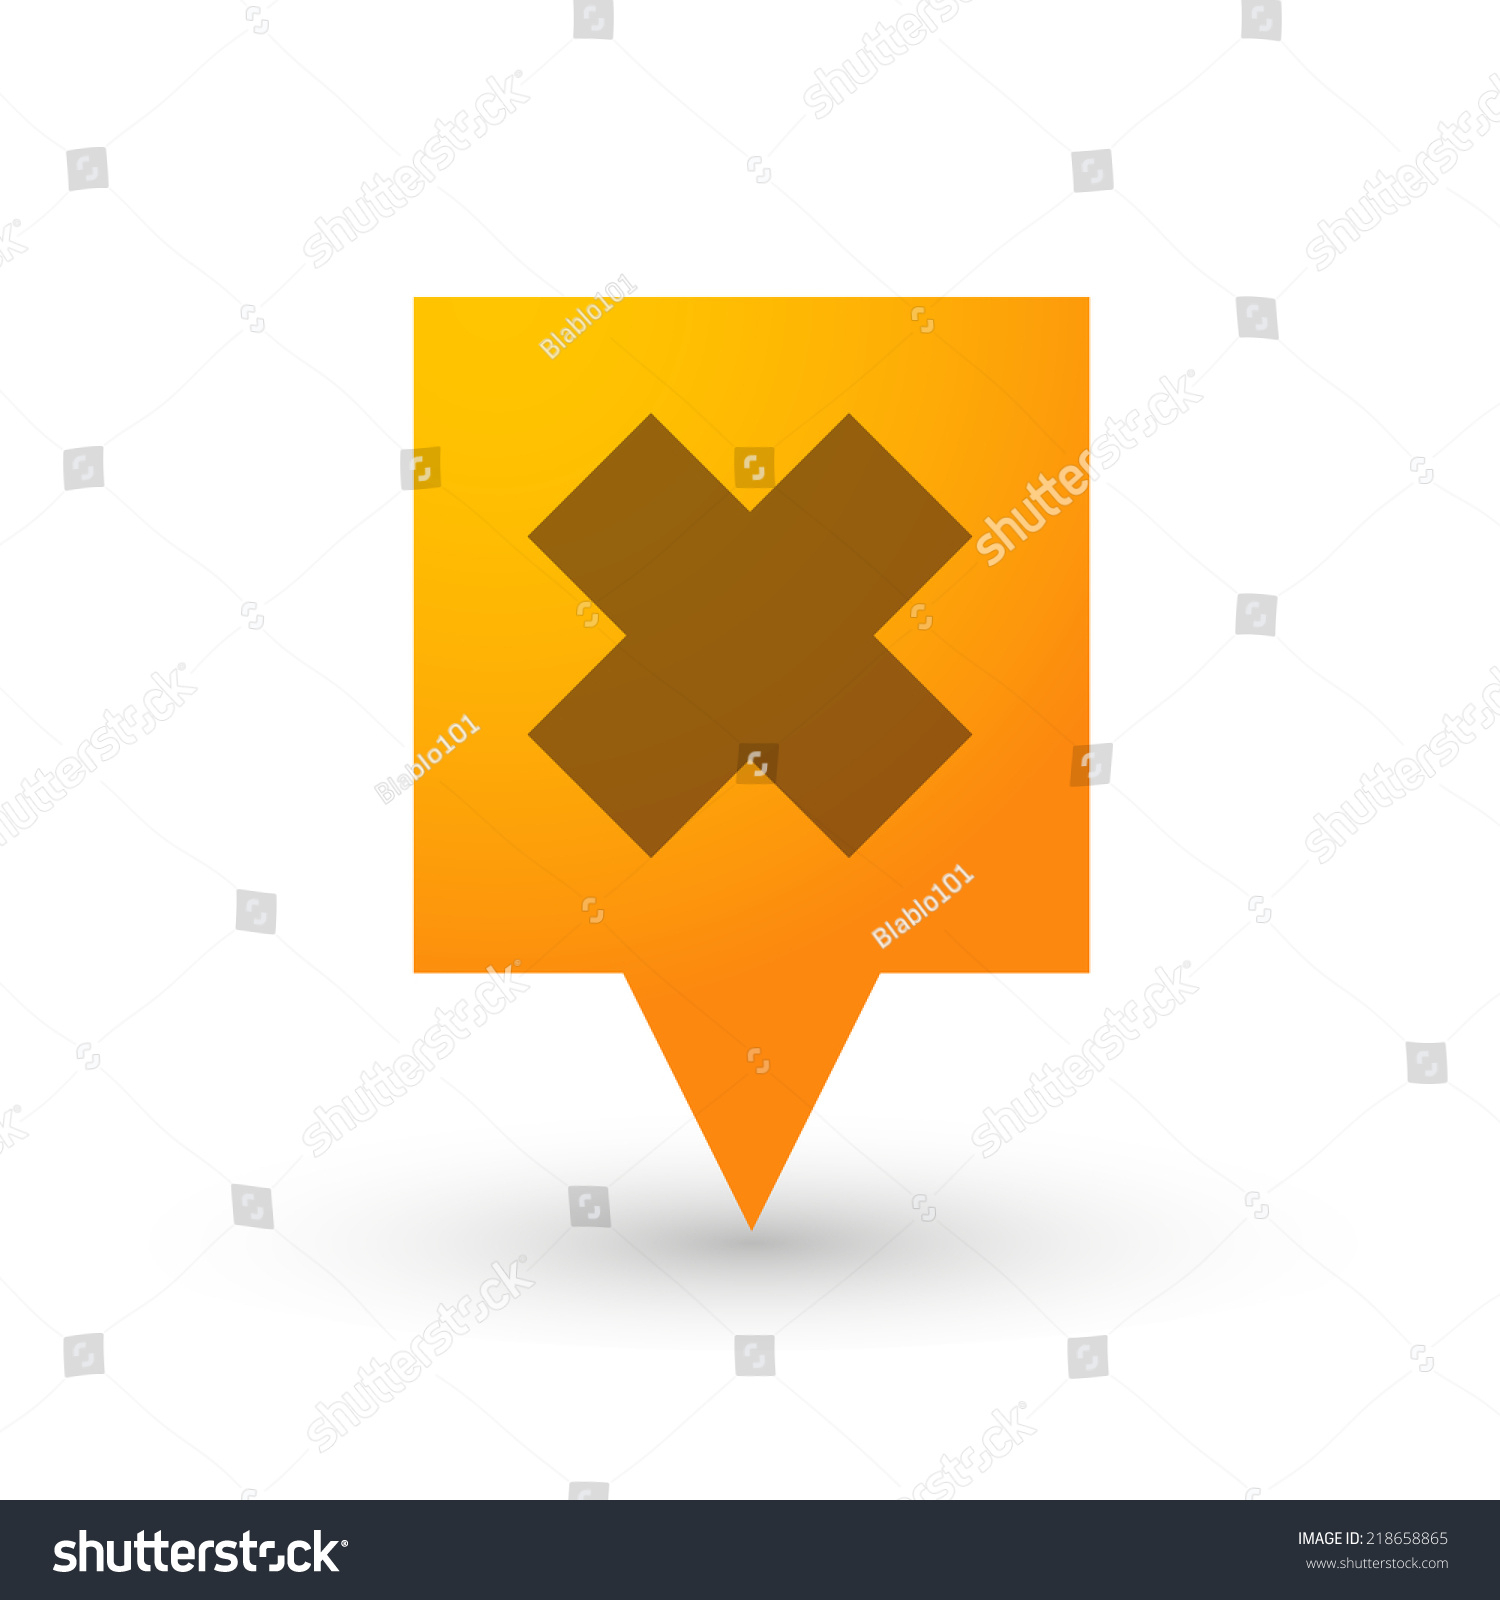 Illustration Isolated Tooltip Irritating Substance Sign Stock Vector Royalty Free 218658865 5566